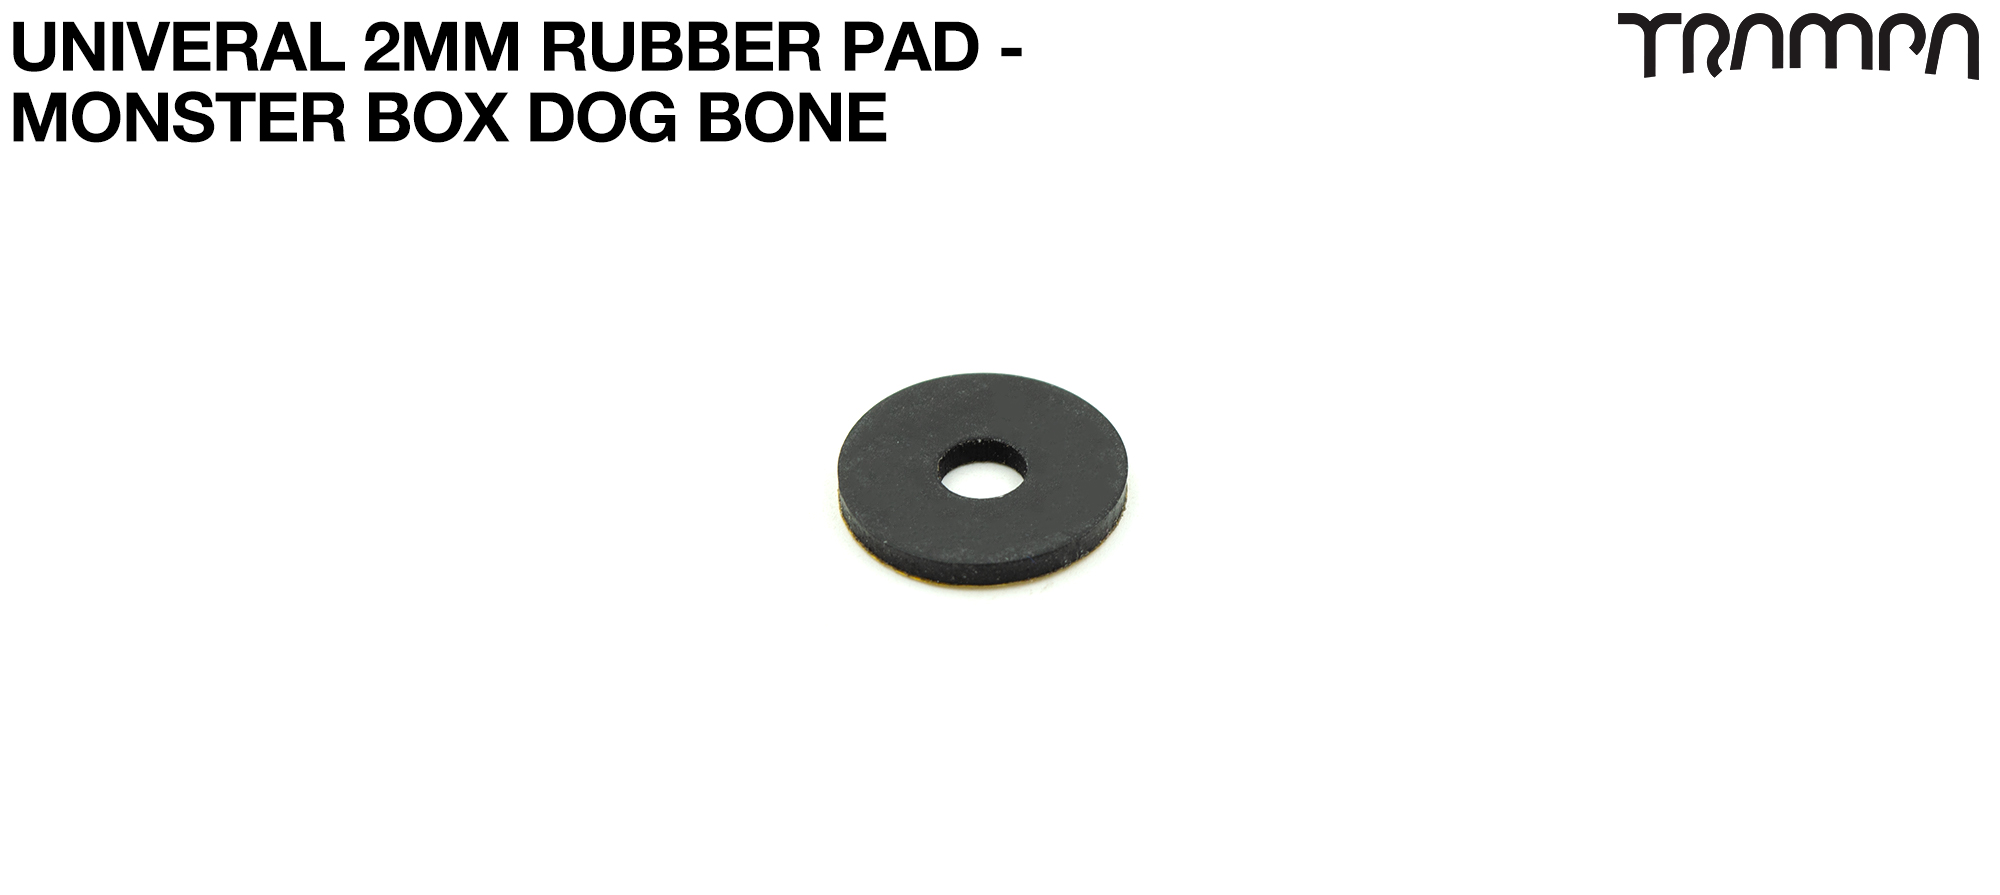 UNIVERSAL Monster Box 2mm thick Anti-Vibration RUBBER PAD for mounting the DOG BONE Securely